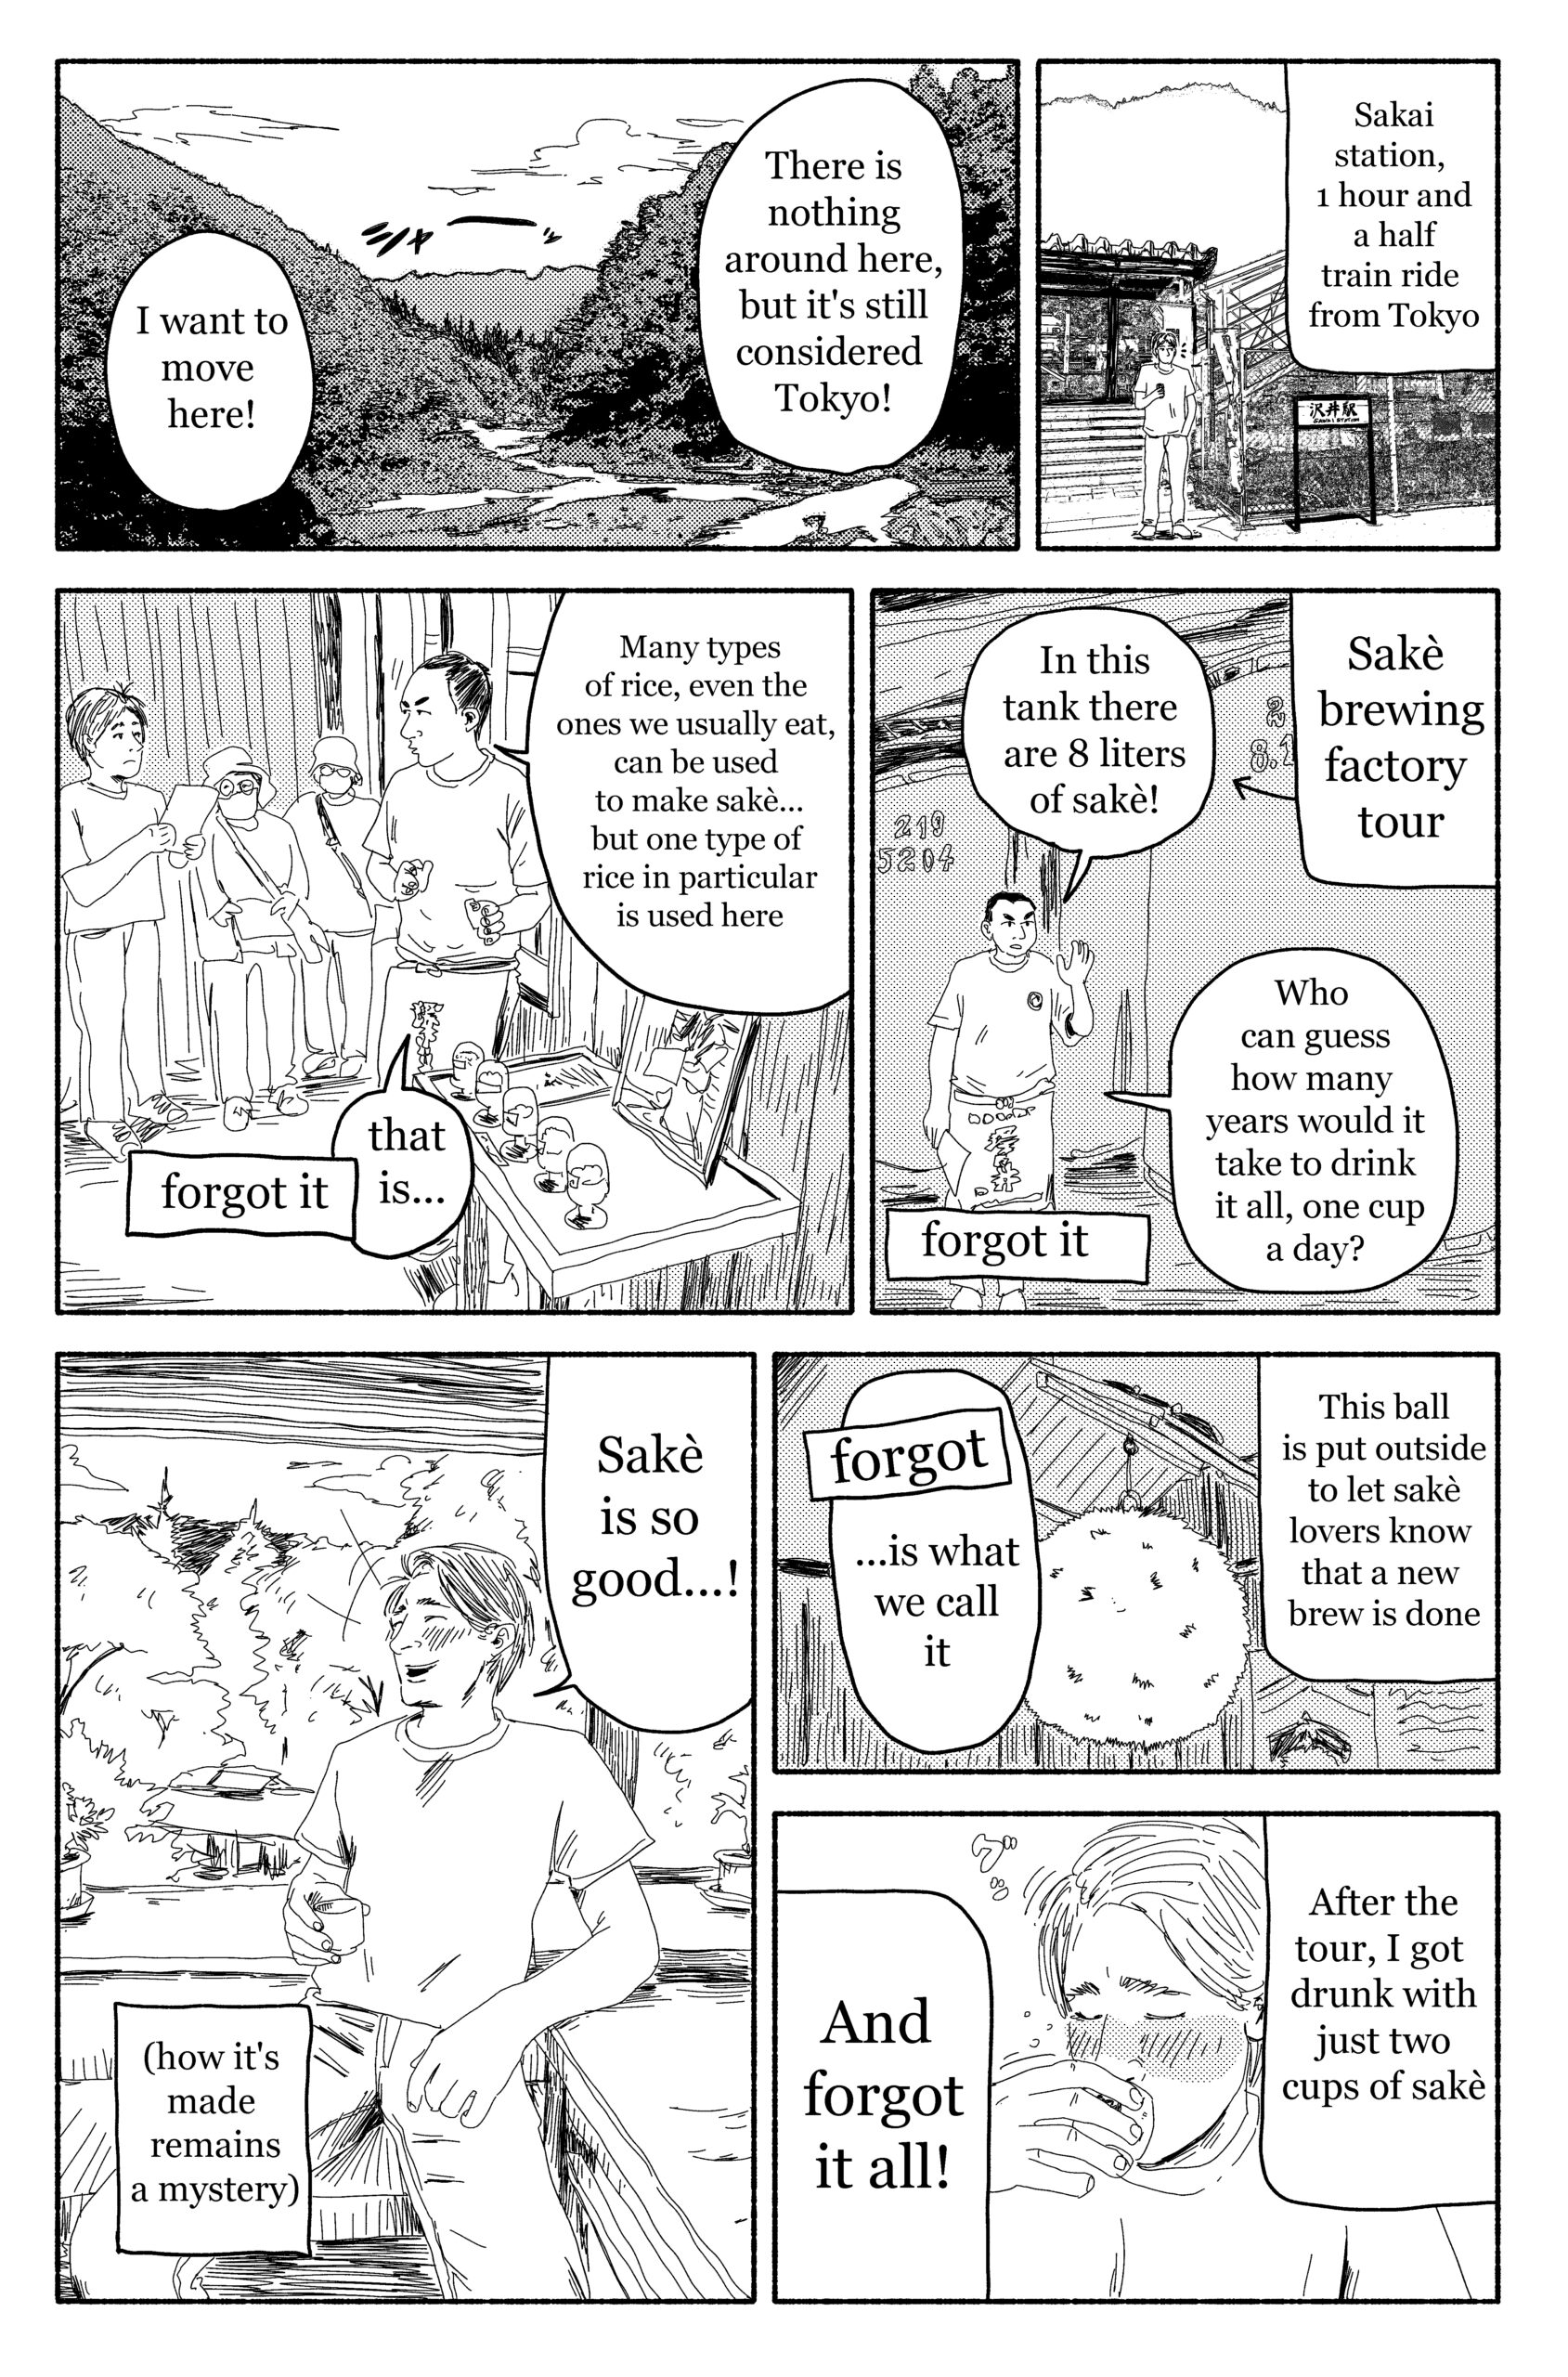 
“You Can Drink but Don’t Get Drunk” Sake Brewery Tour Manga Series: Italian Manga Artist Peppe’s Encounter With Japanese Culture Vol.3 